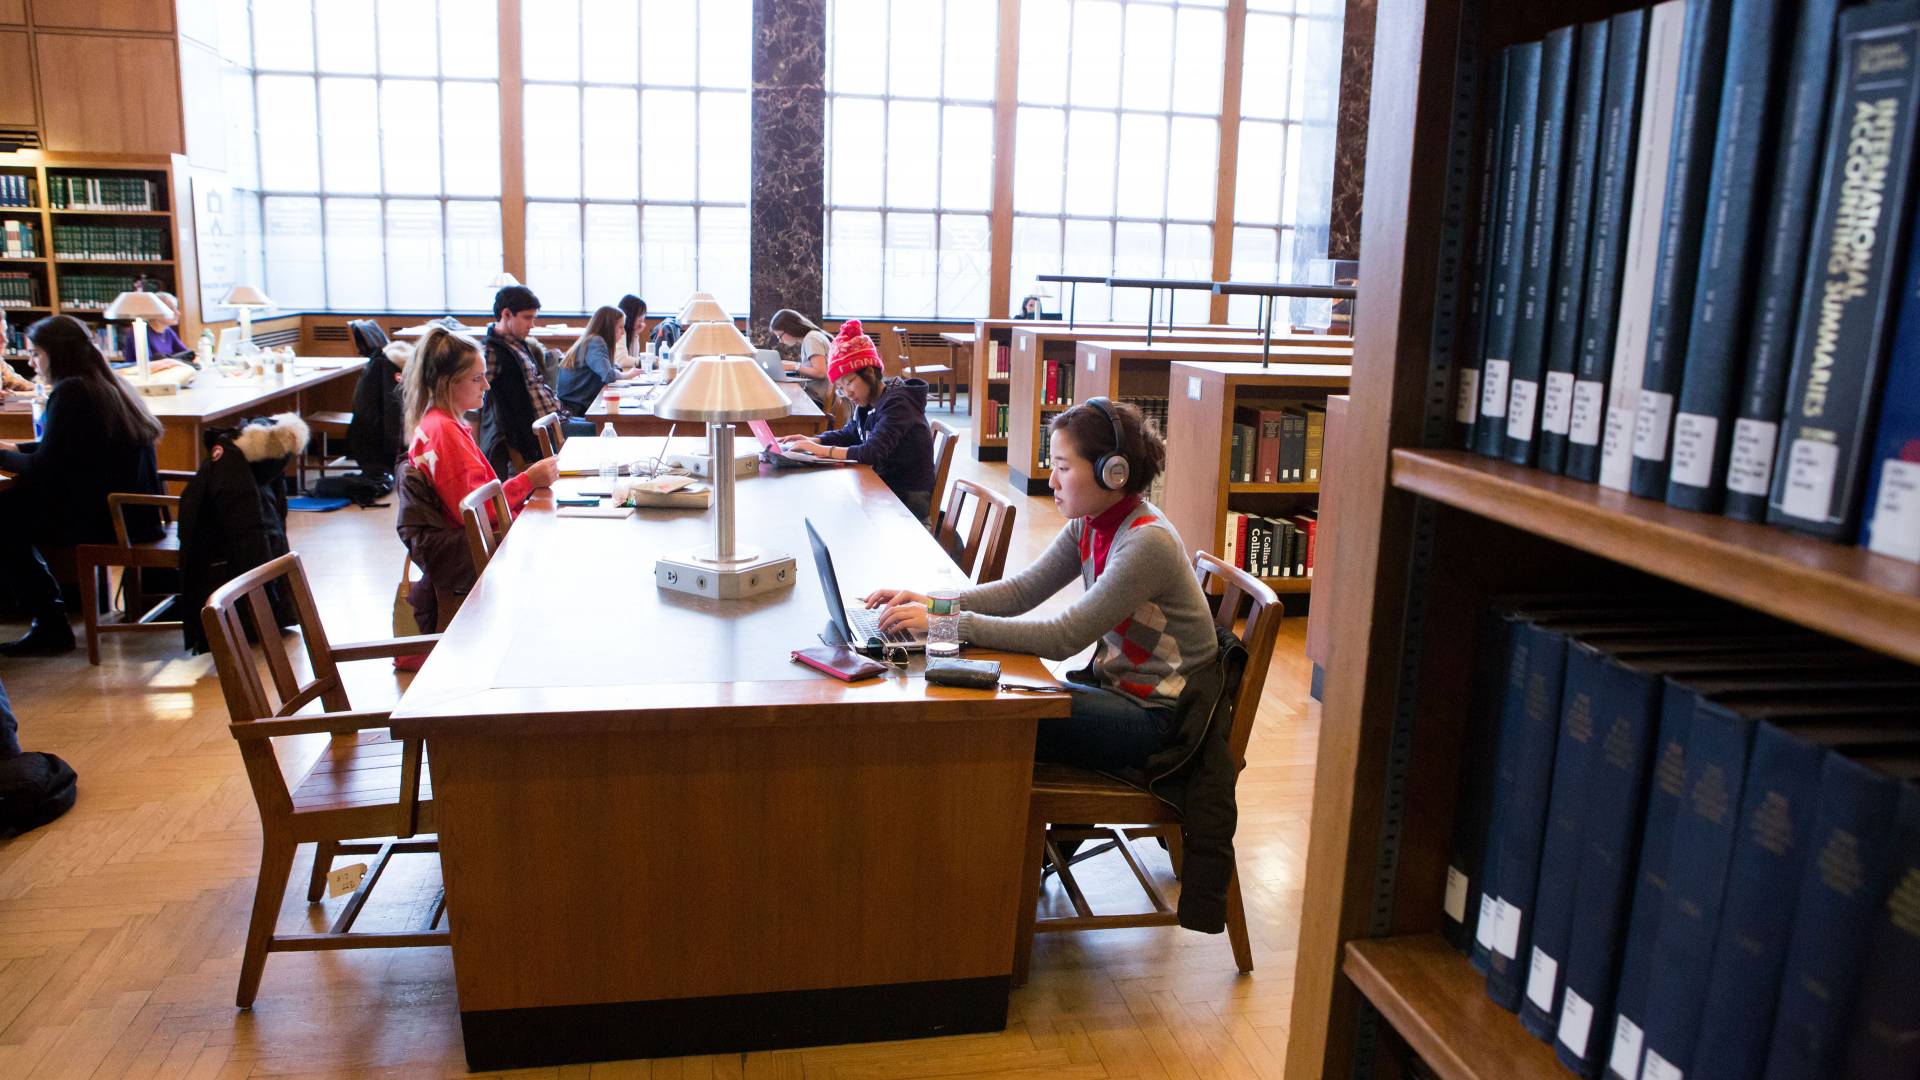 Students study at tables in firestone library in front of large windows